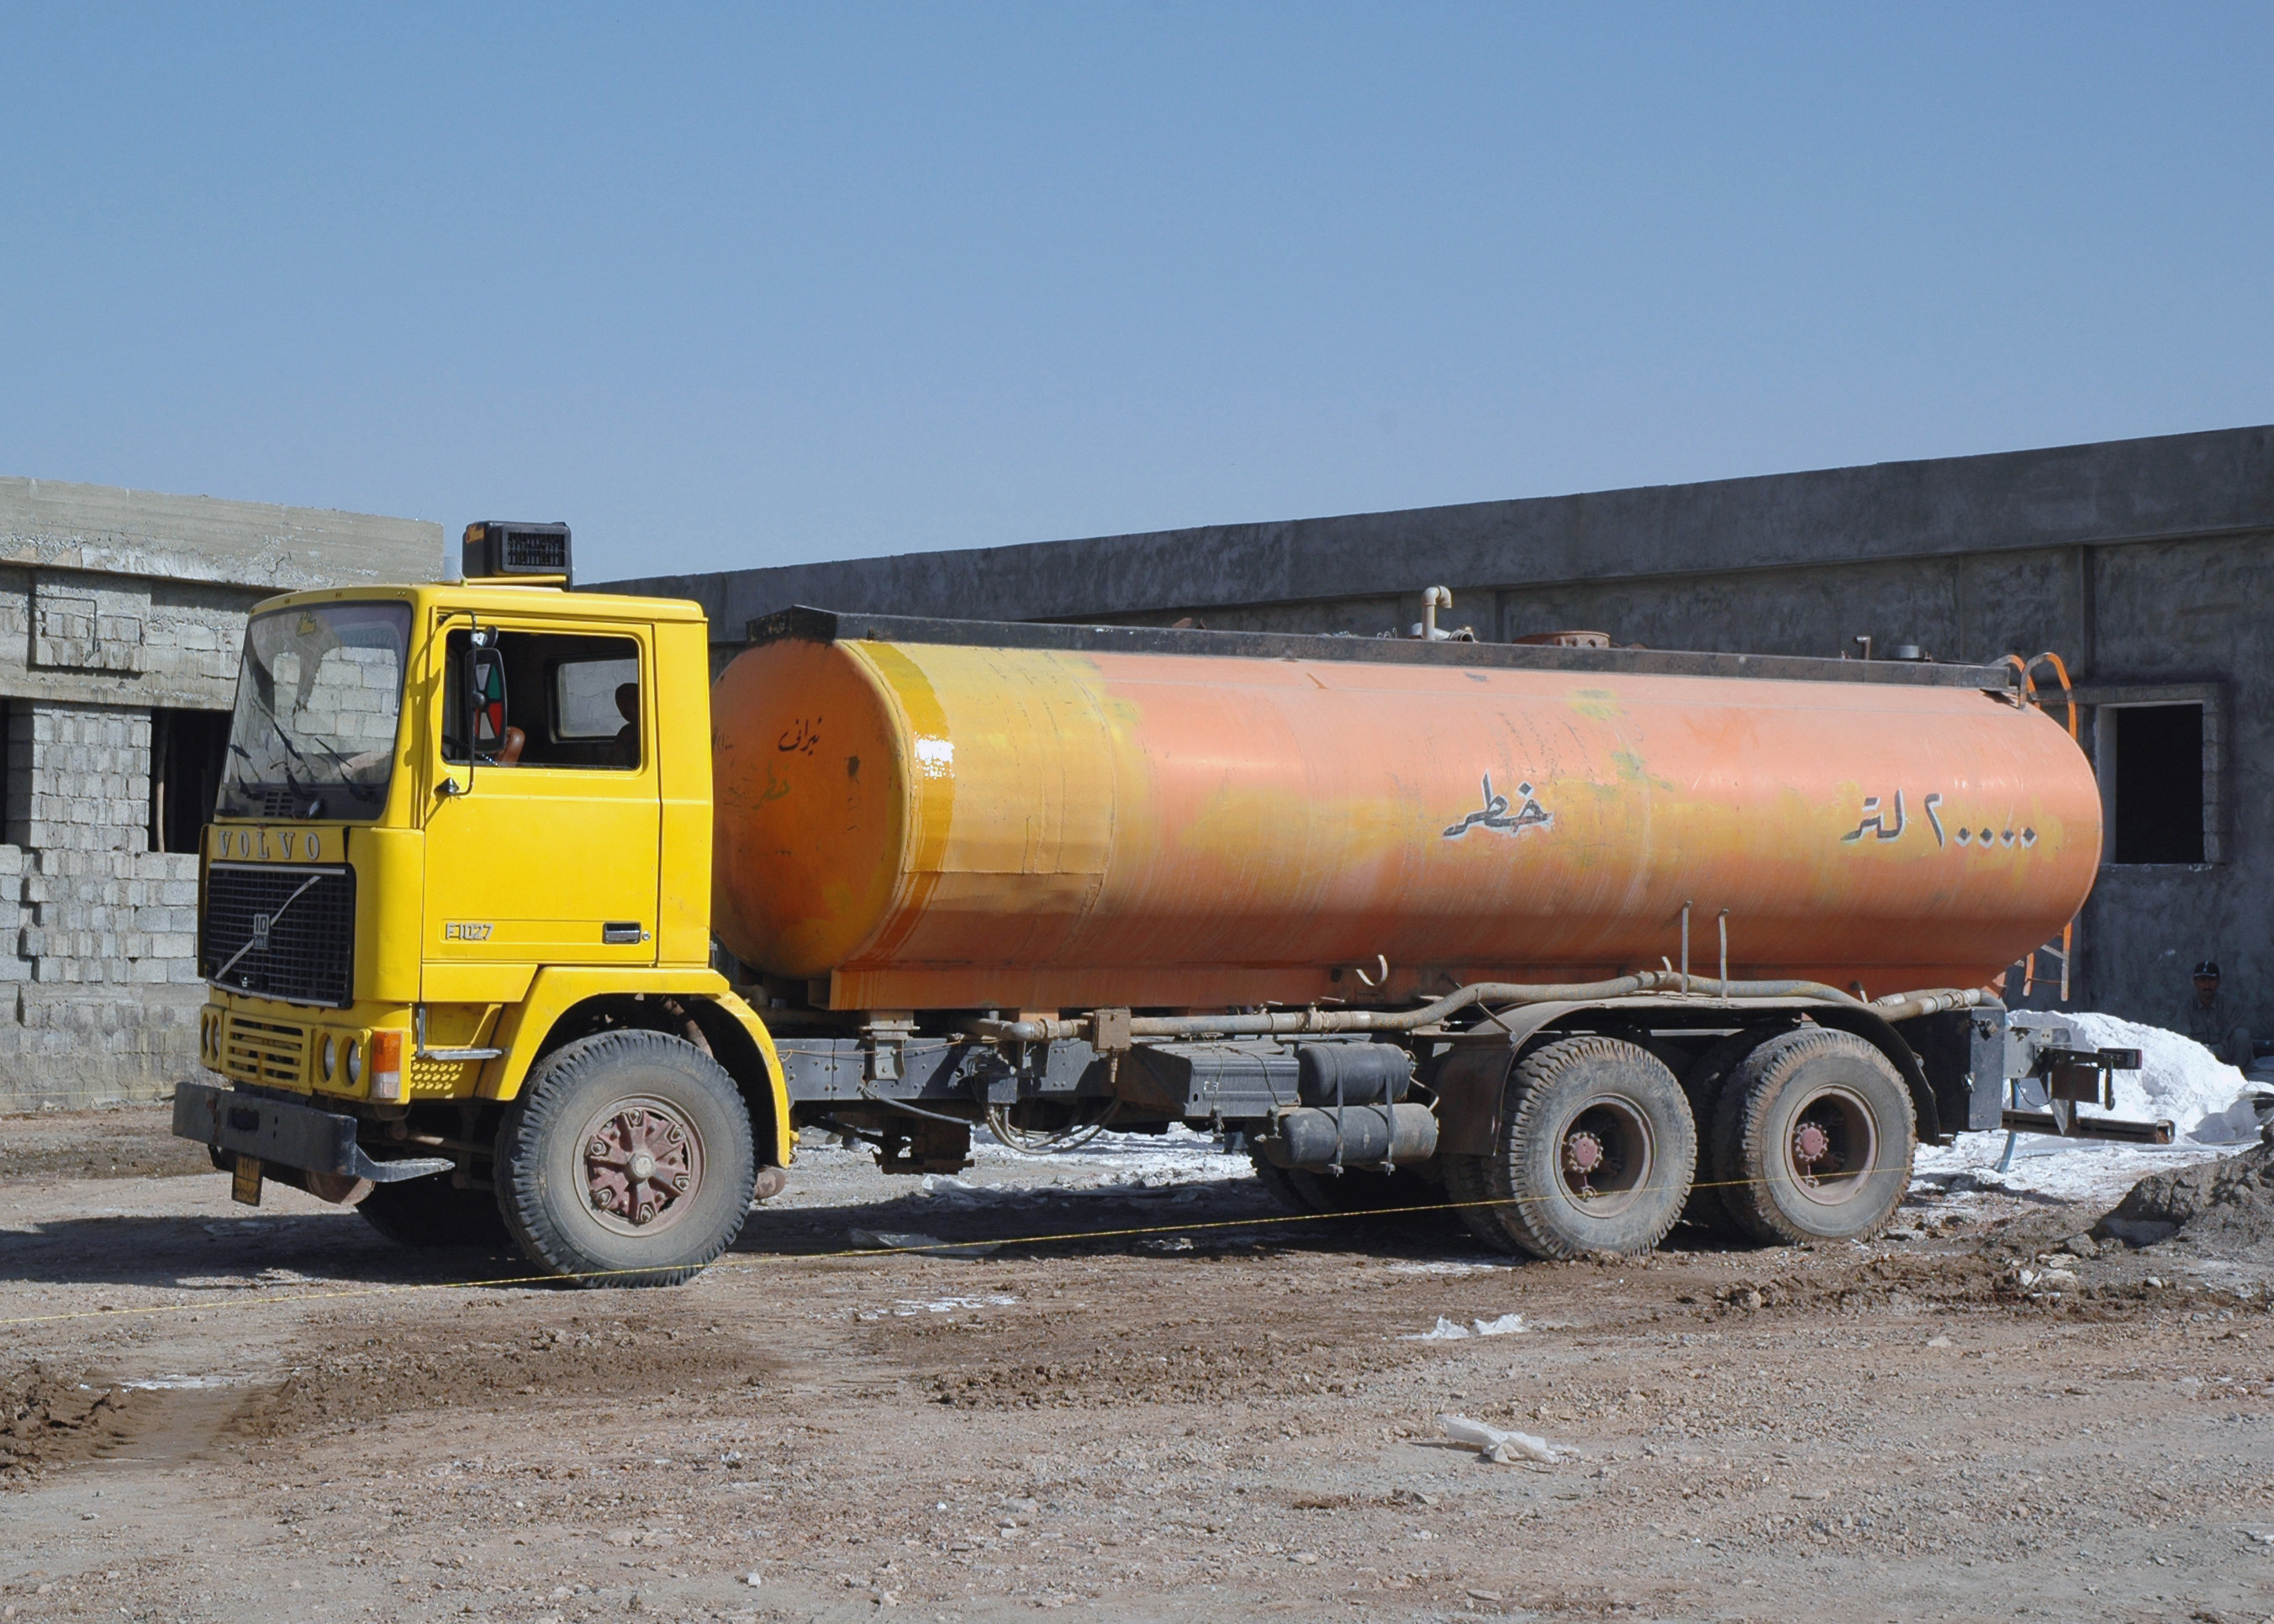 An image labeled "E", a photo of an 18-wheeler tanker truck with a cylinder-shaped tank.